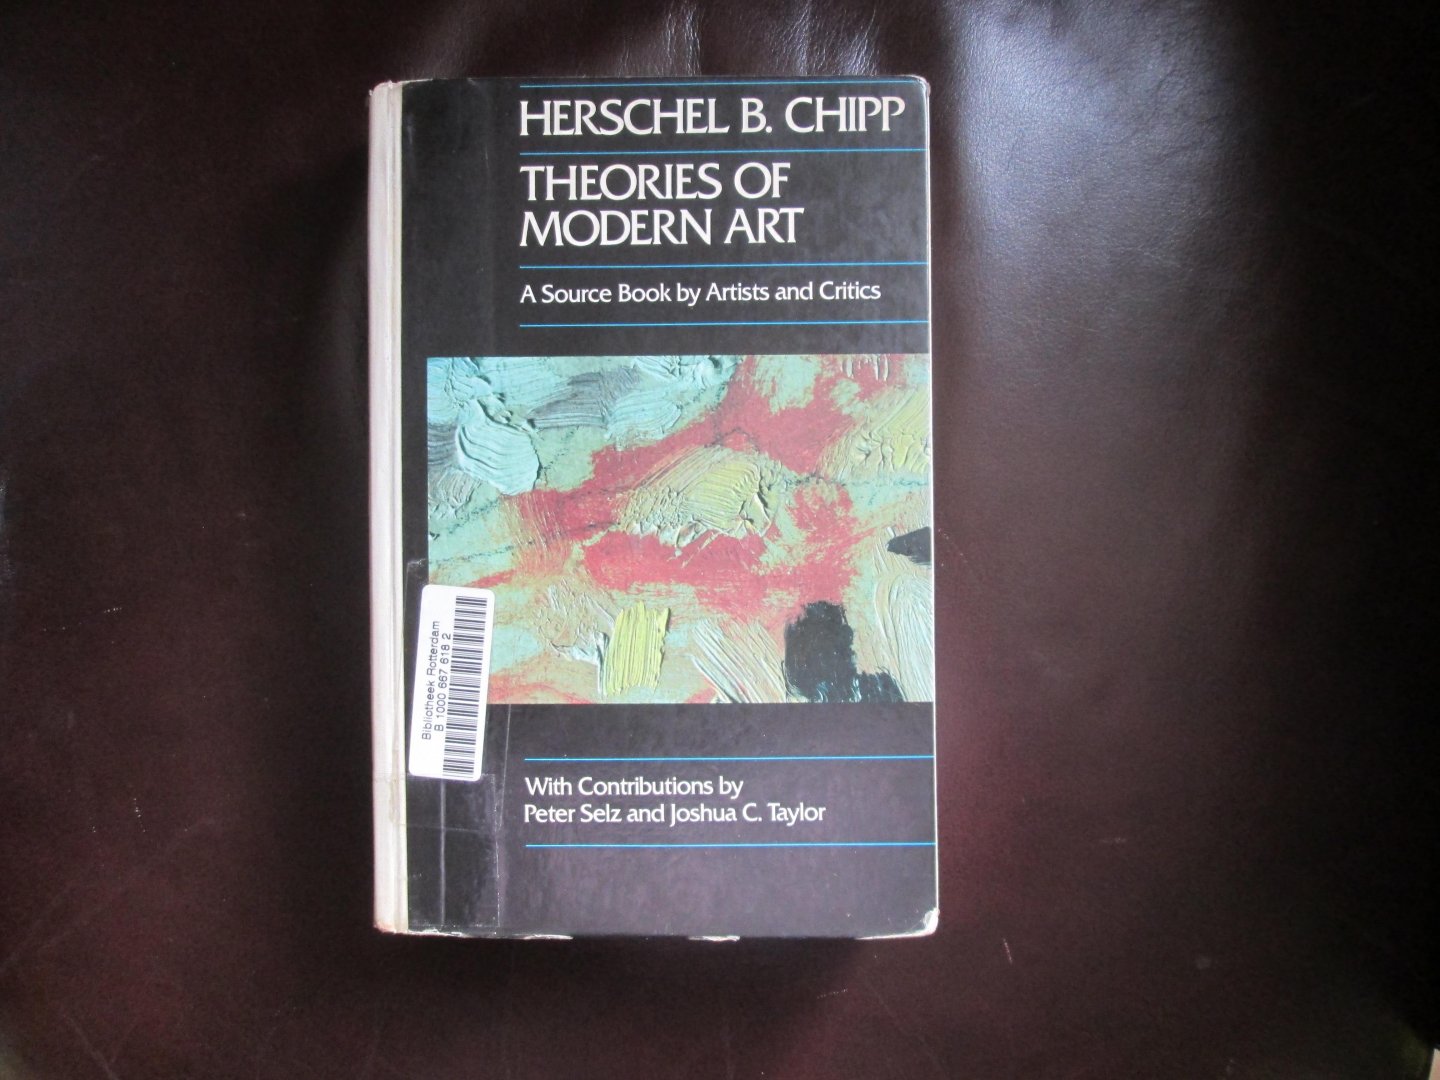 Chipp , Herschel B. ( with contributions by Peter Selz and Joshua C. Taylor ) - THEORIES OF MODERN ART ; A Source Book by Artists and Critics